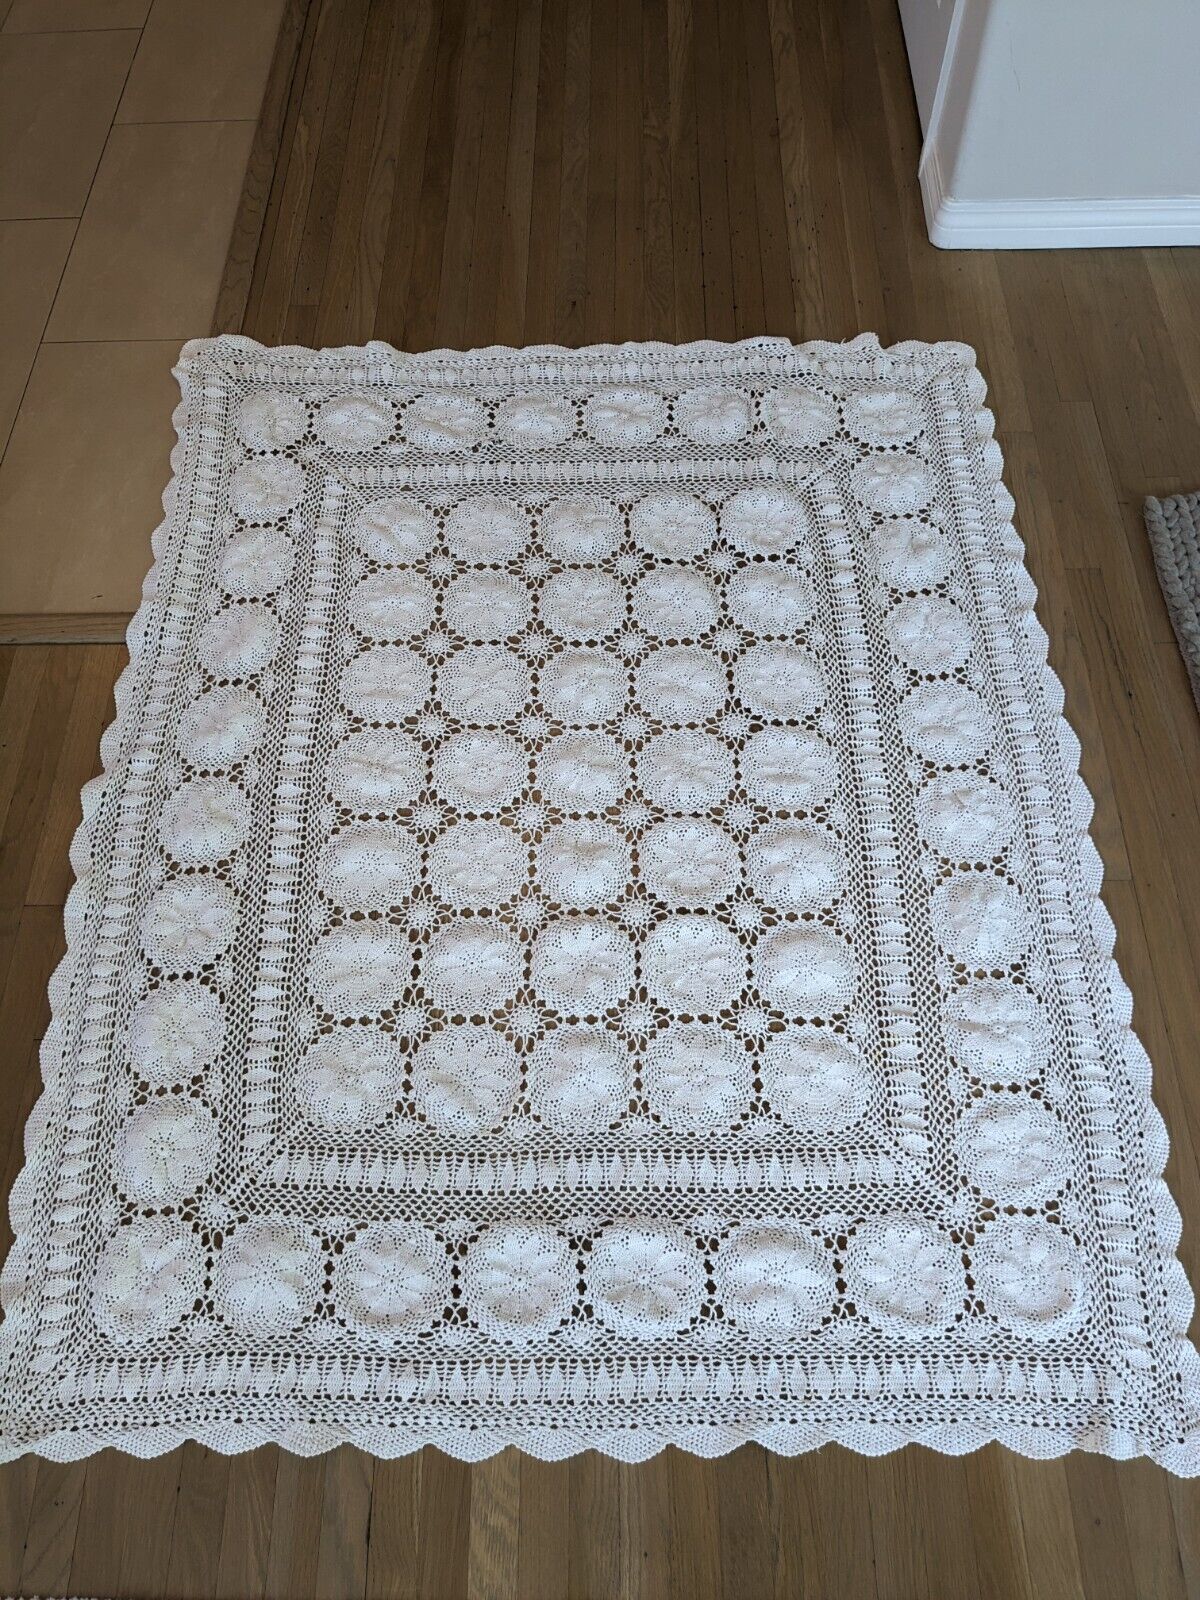 VNTG Handmade Cream Colored Crocheted Tablecloth/Bed Cover Few Flaws (SeePhotos)